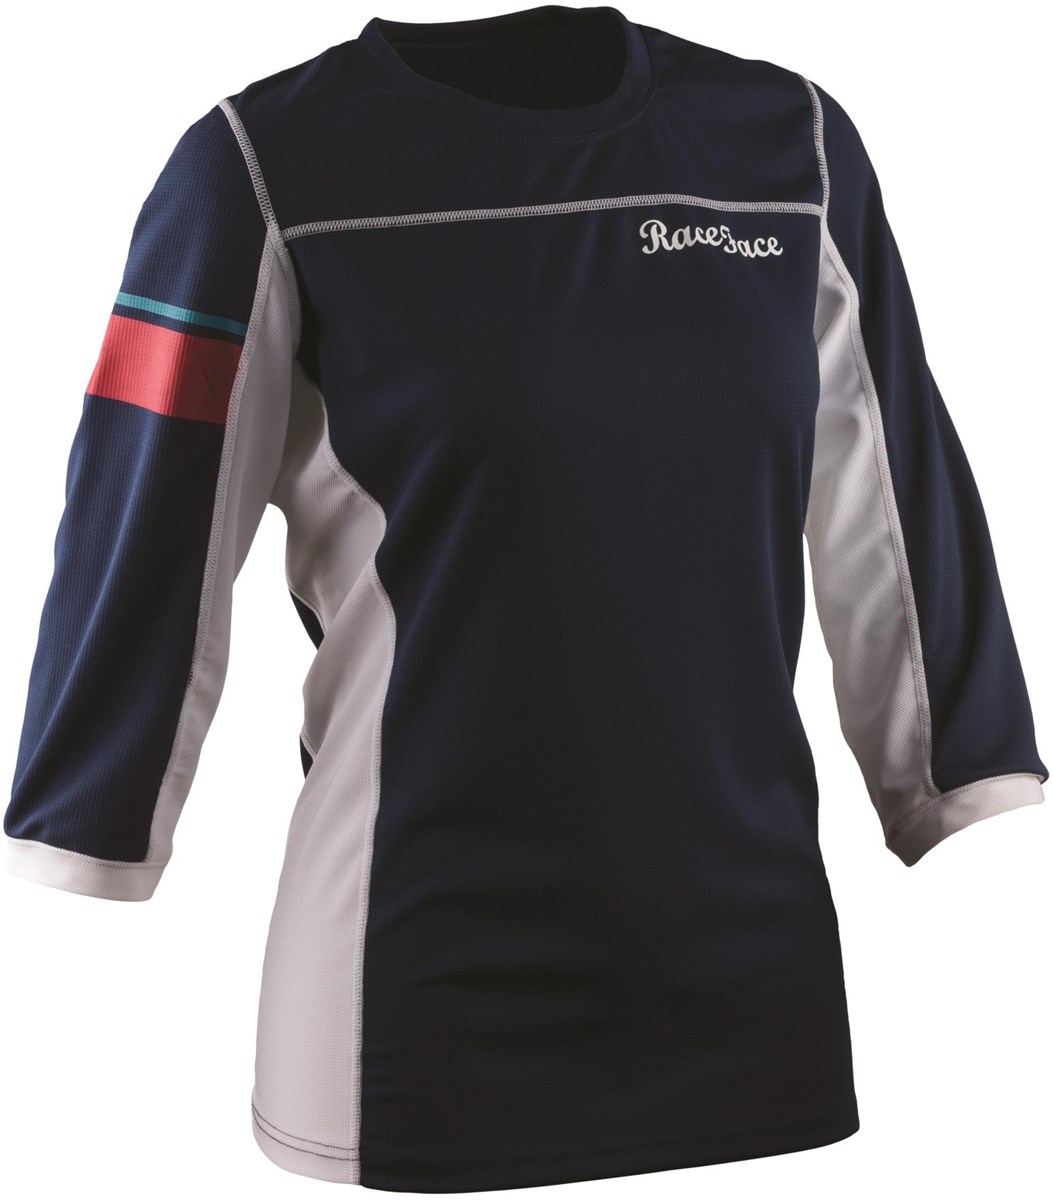 Race Face Khyber Womens 3/4 Sleeve Cycling Jersey product image